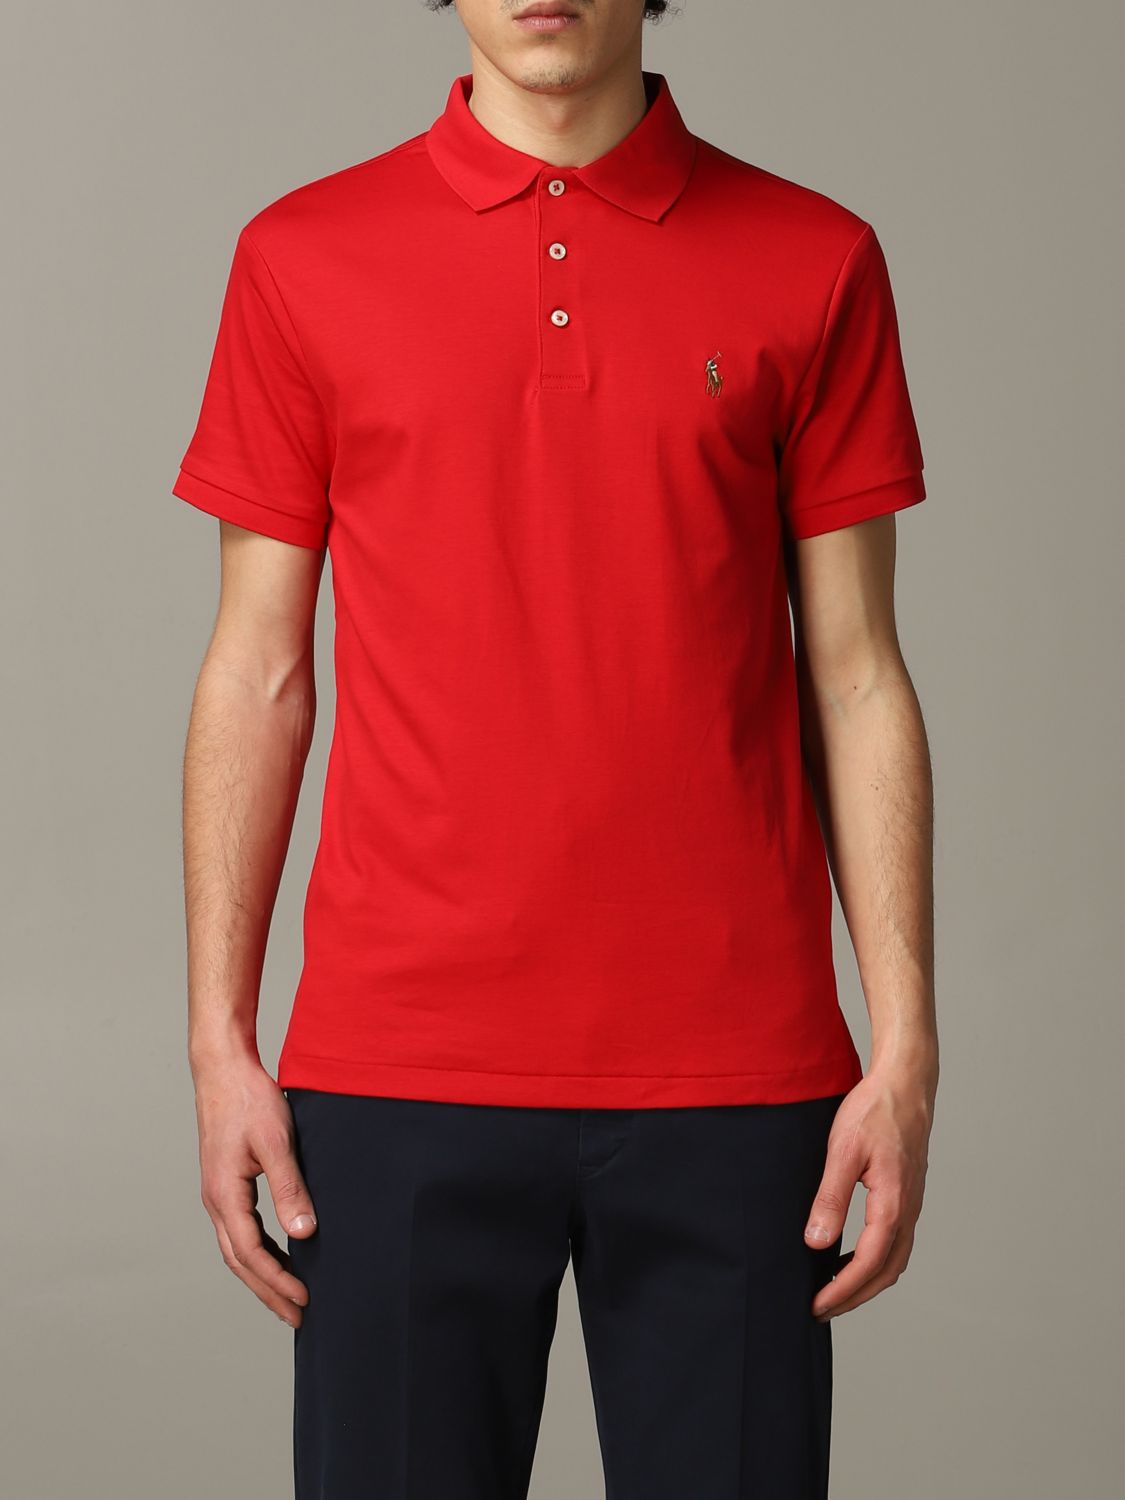 Polo Ralph Lauren Outlet: polo shirt with short sleeves | Polo Shirt